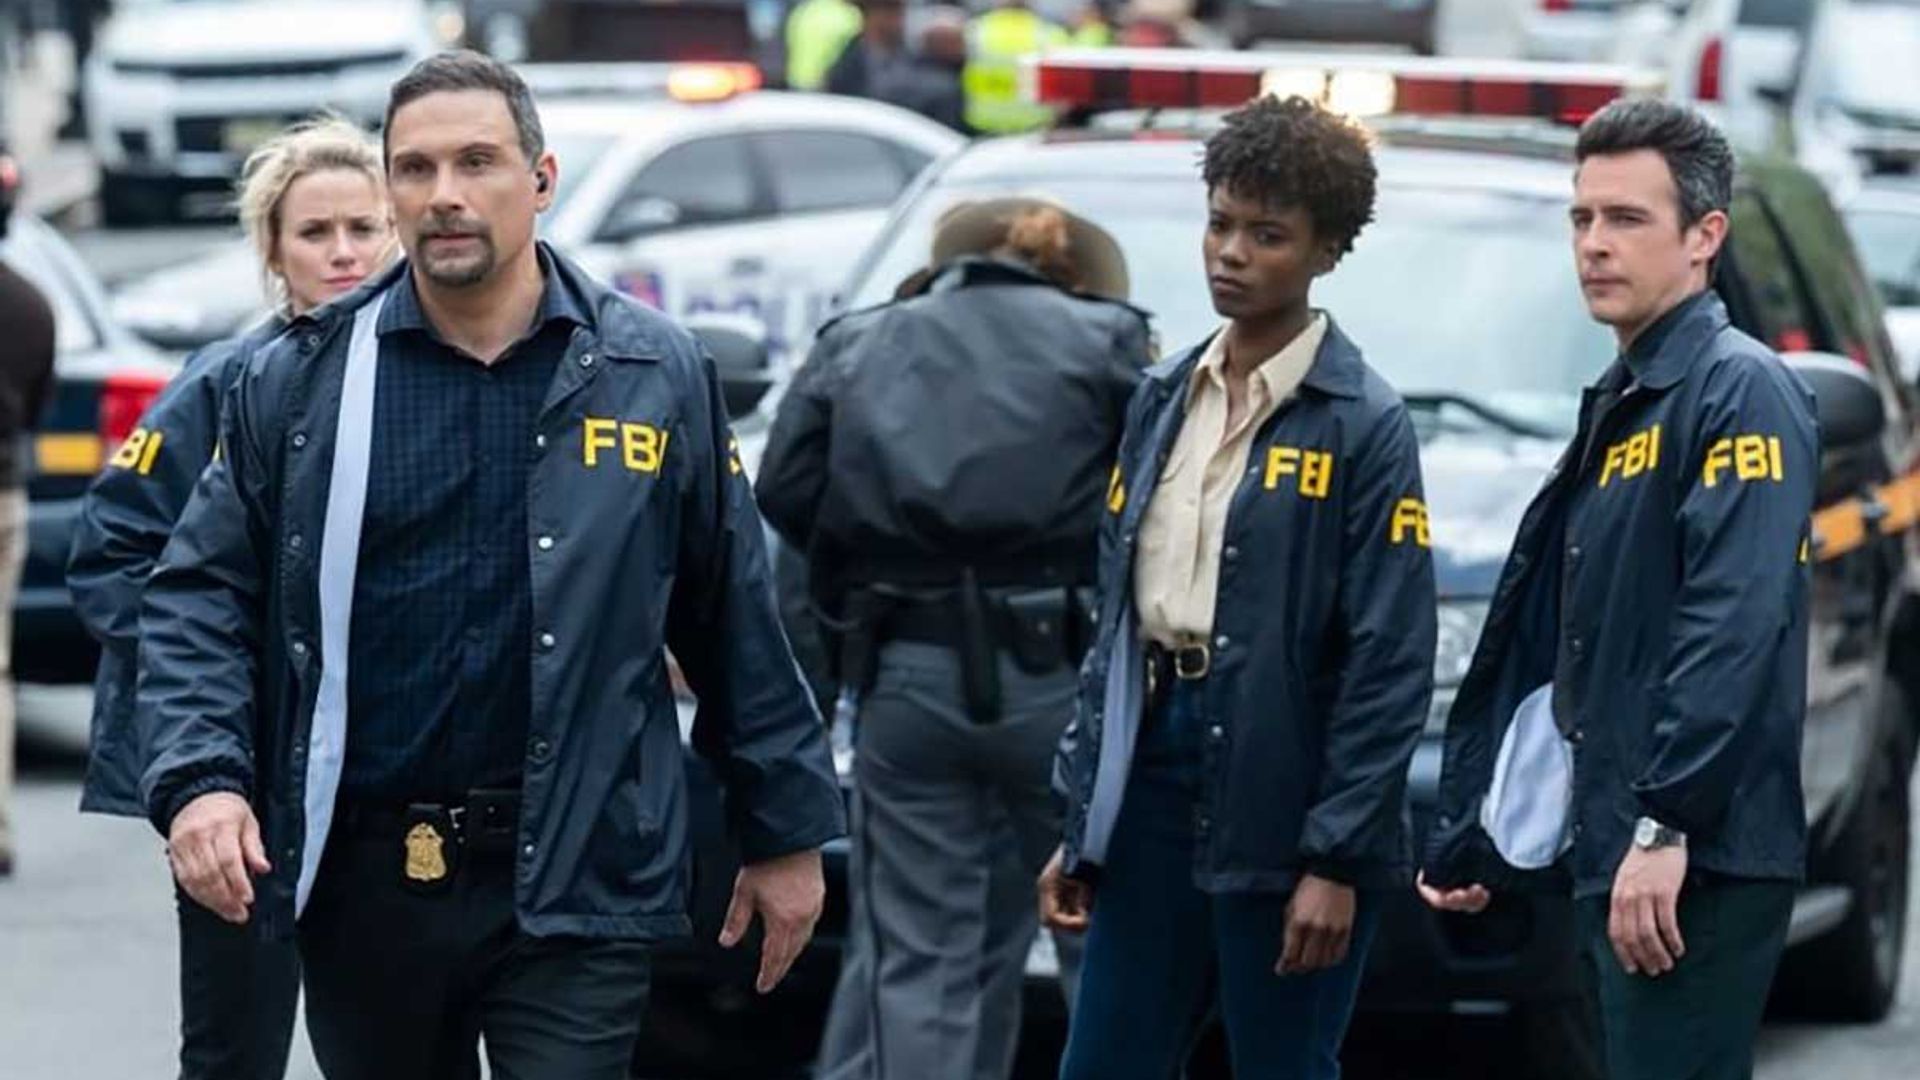 FBI finale pulled from schedule in light of Texas shooting details